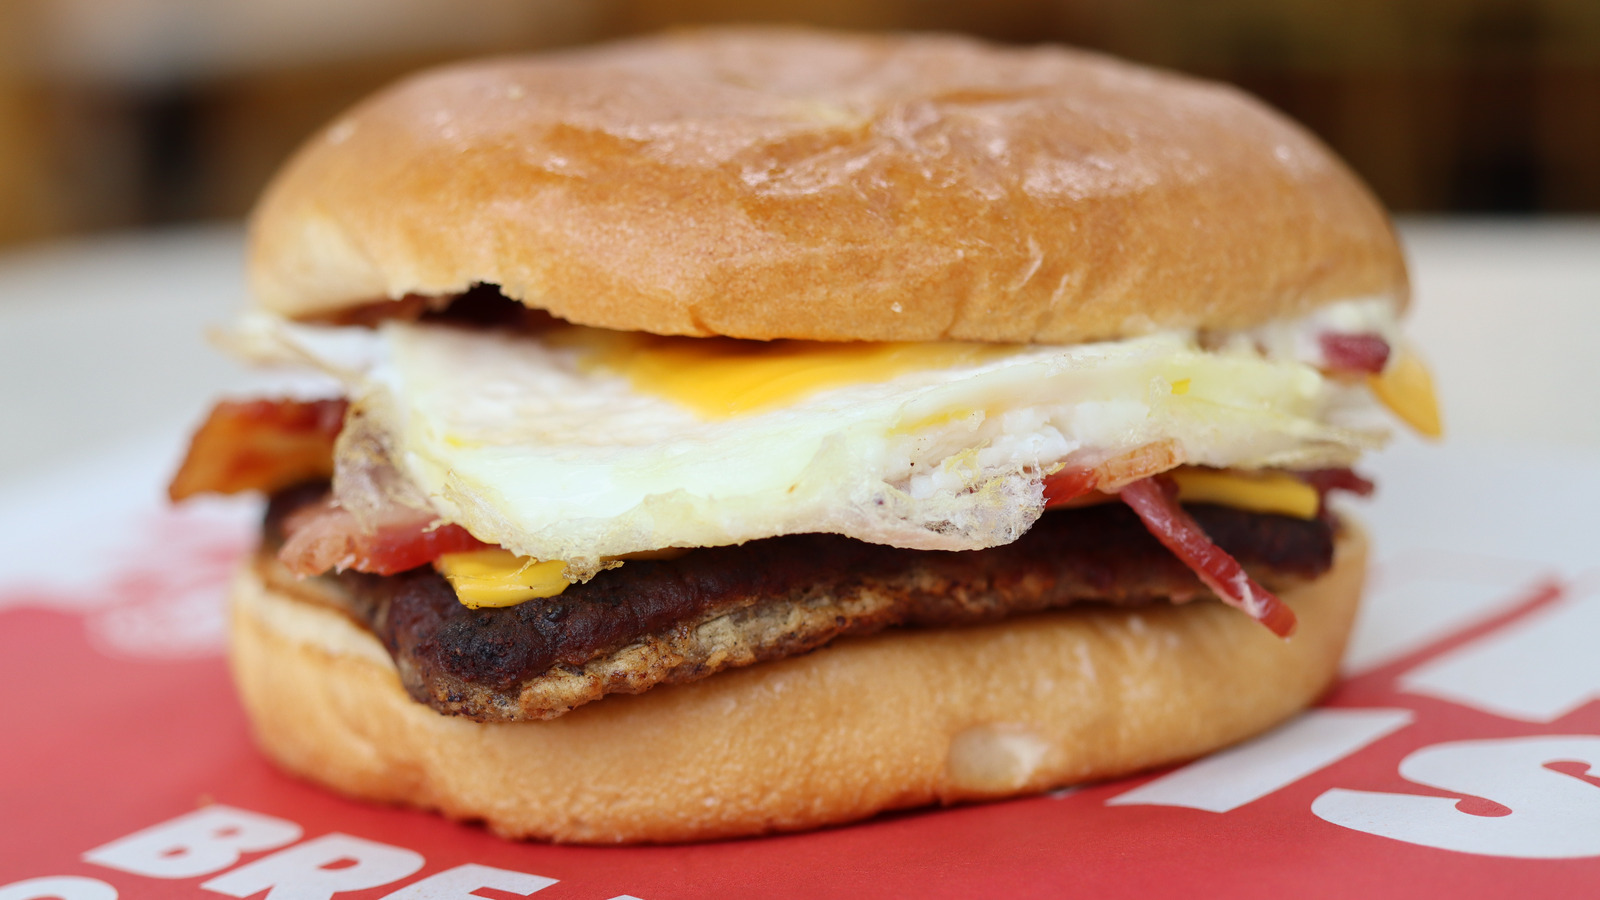 The Wendy's Egg Fact That'll Make You Feel Better About Your Order